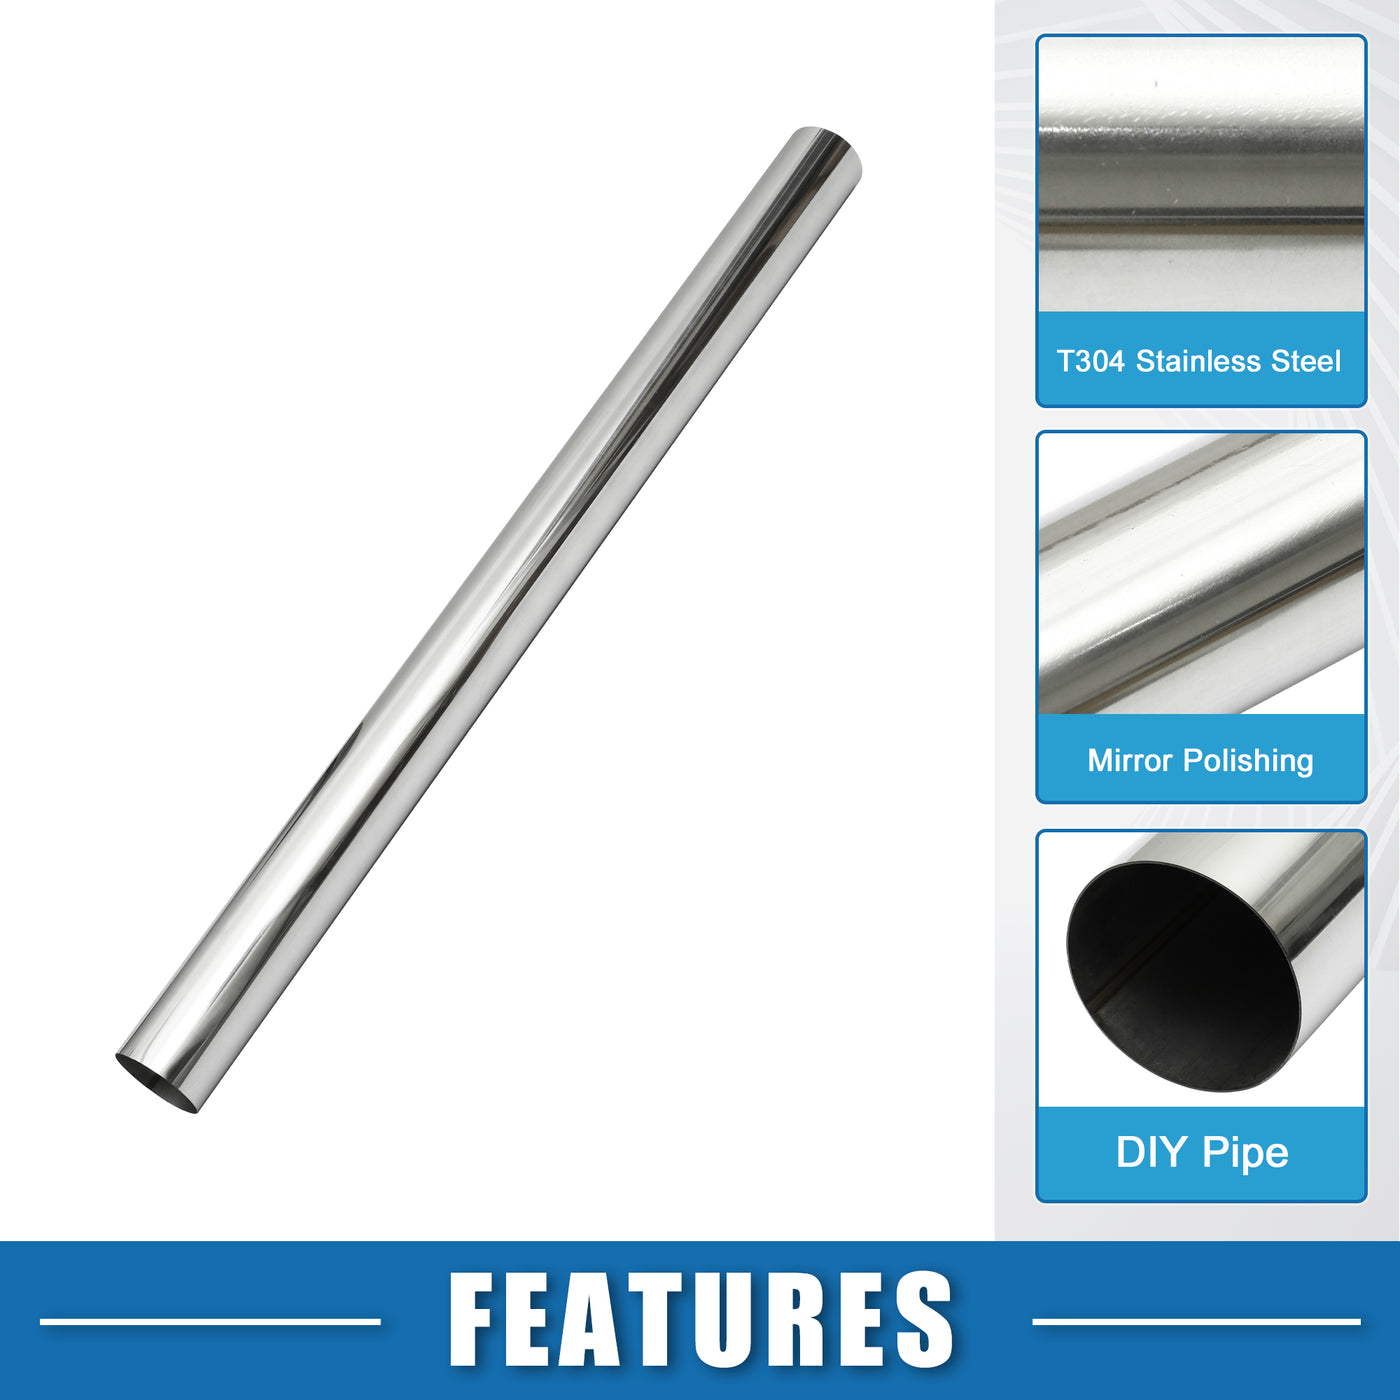 A ABSOPRO Car Mandrel Exhaust Pipe Tube Durable 48" Length 3.5'' OD Straight Exhaust Tube DIY Custom 0 Degree Modified Piping T304 Stainless Steel (Set of 2)